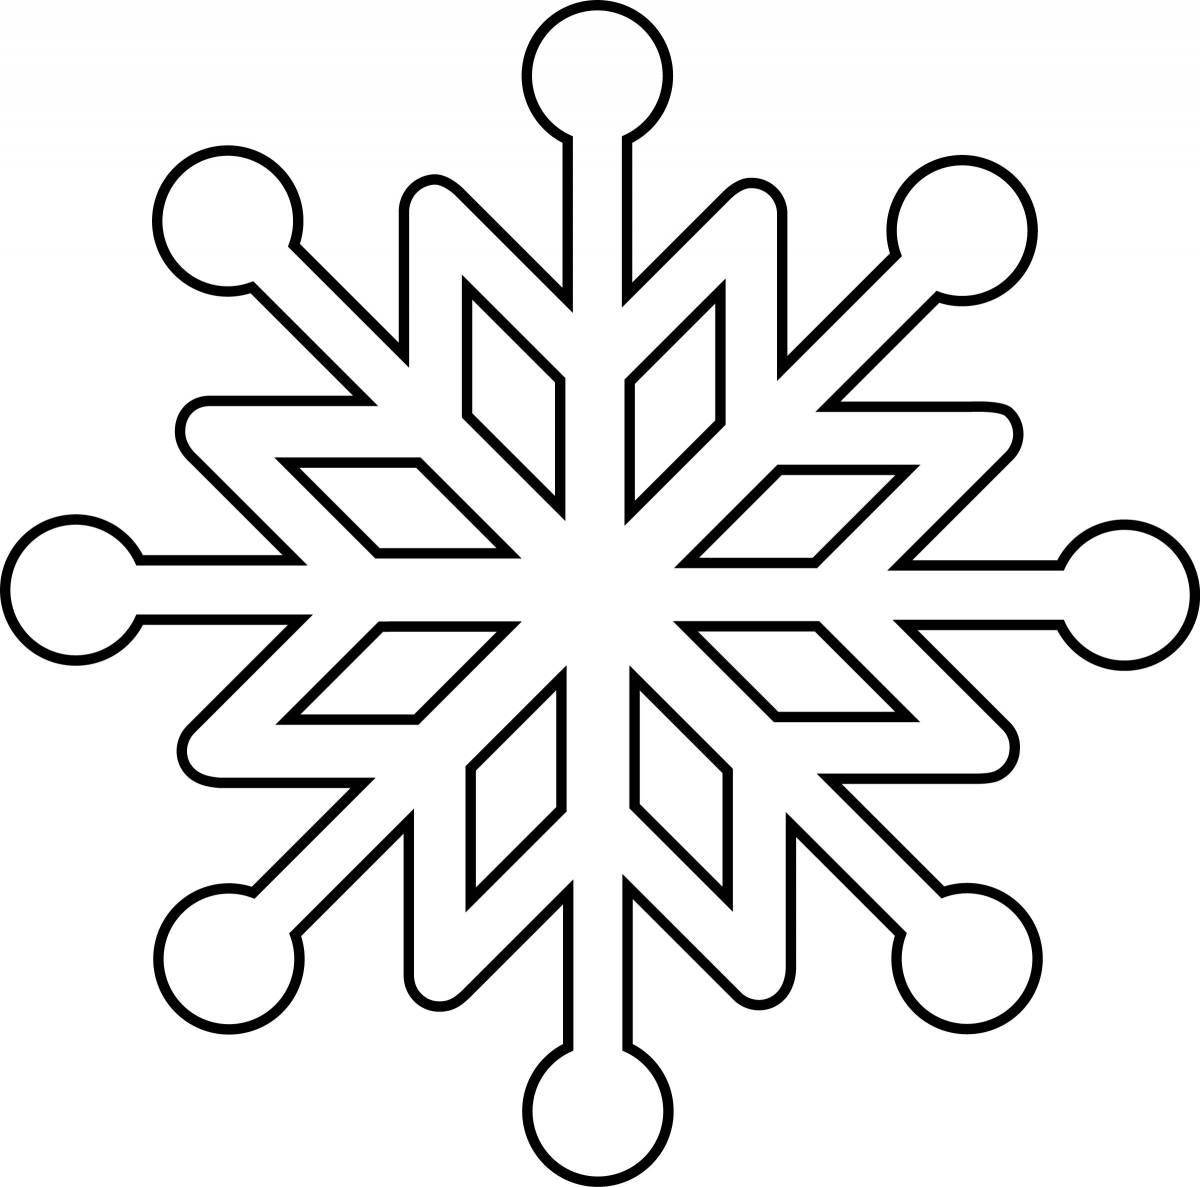 Gorgeous snowflake coloring page